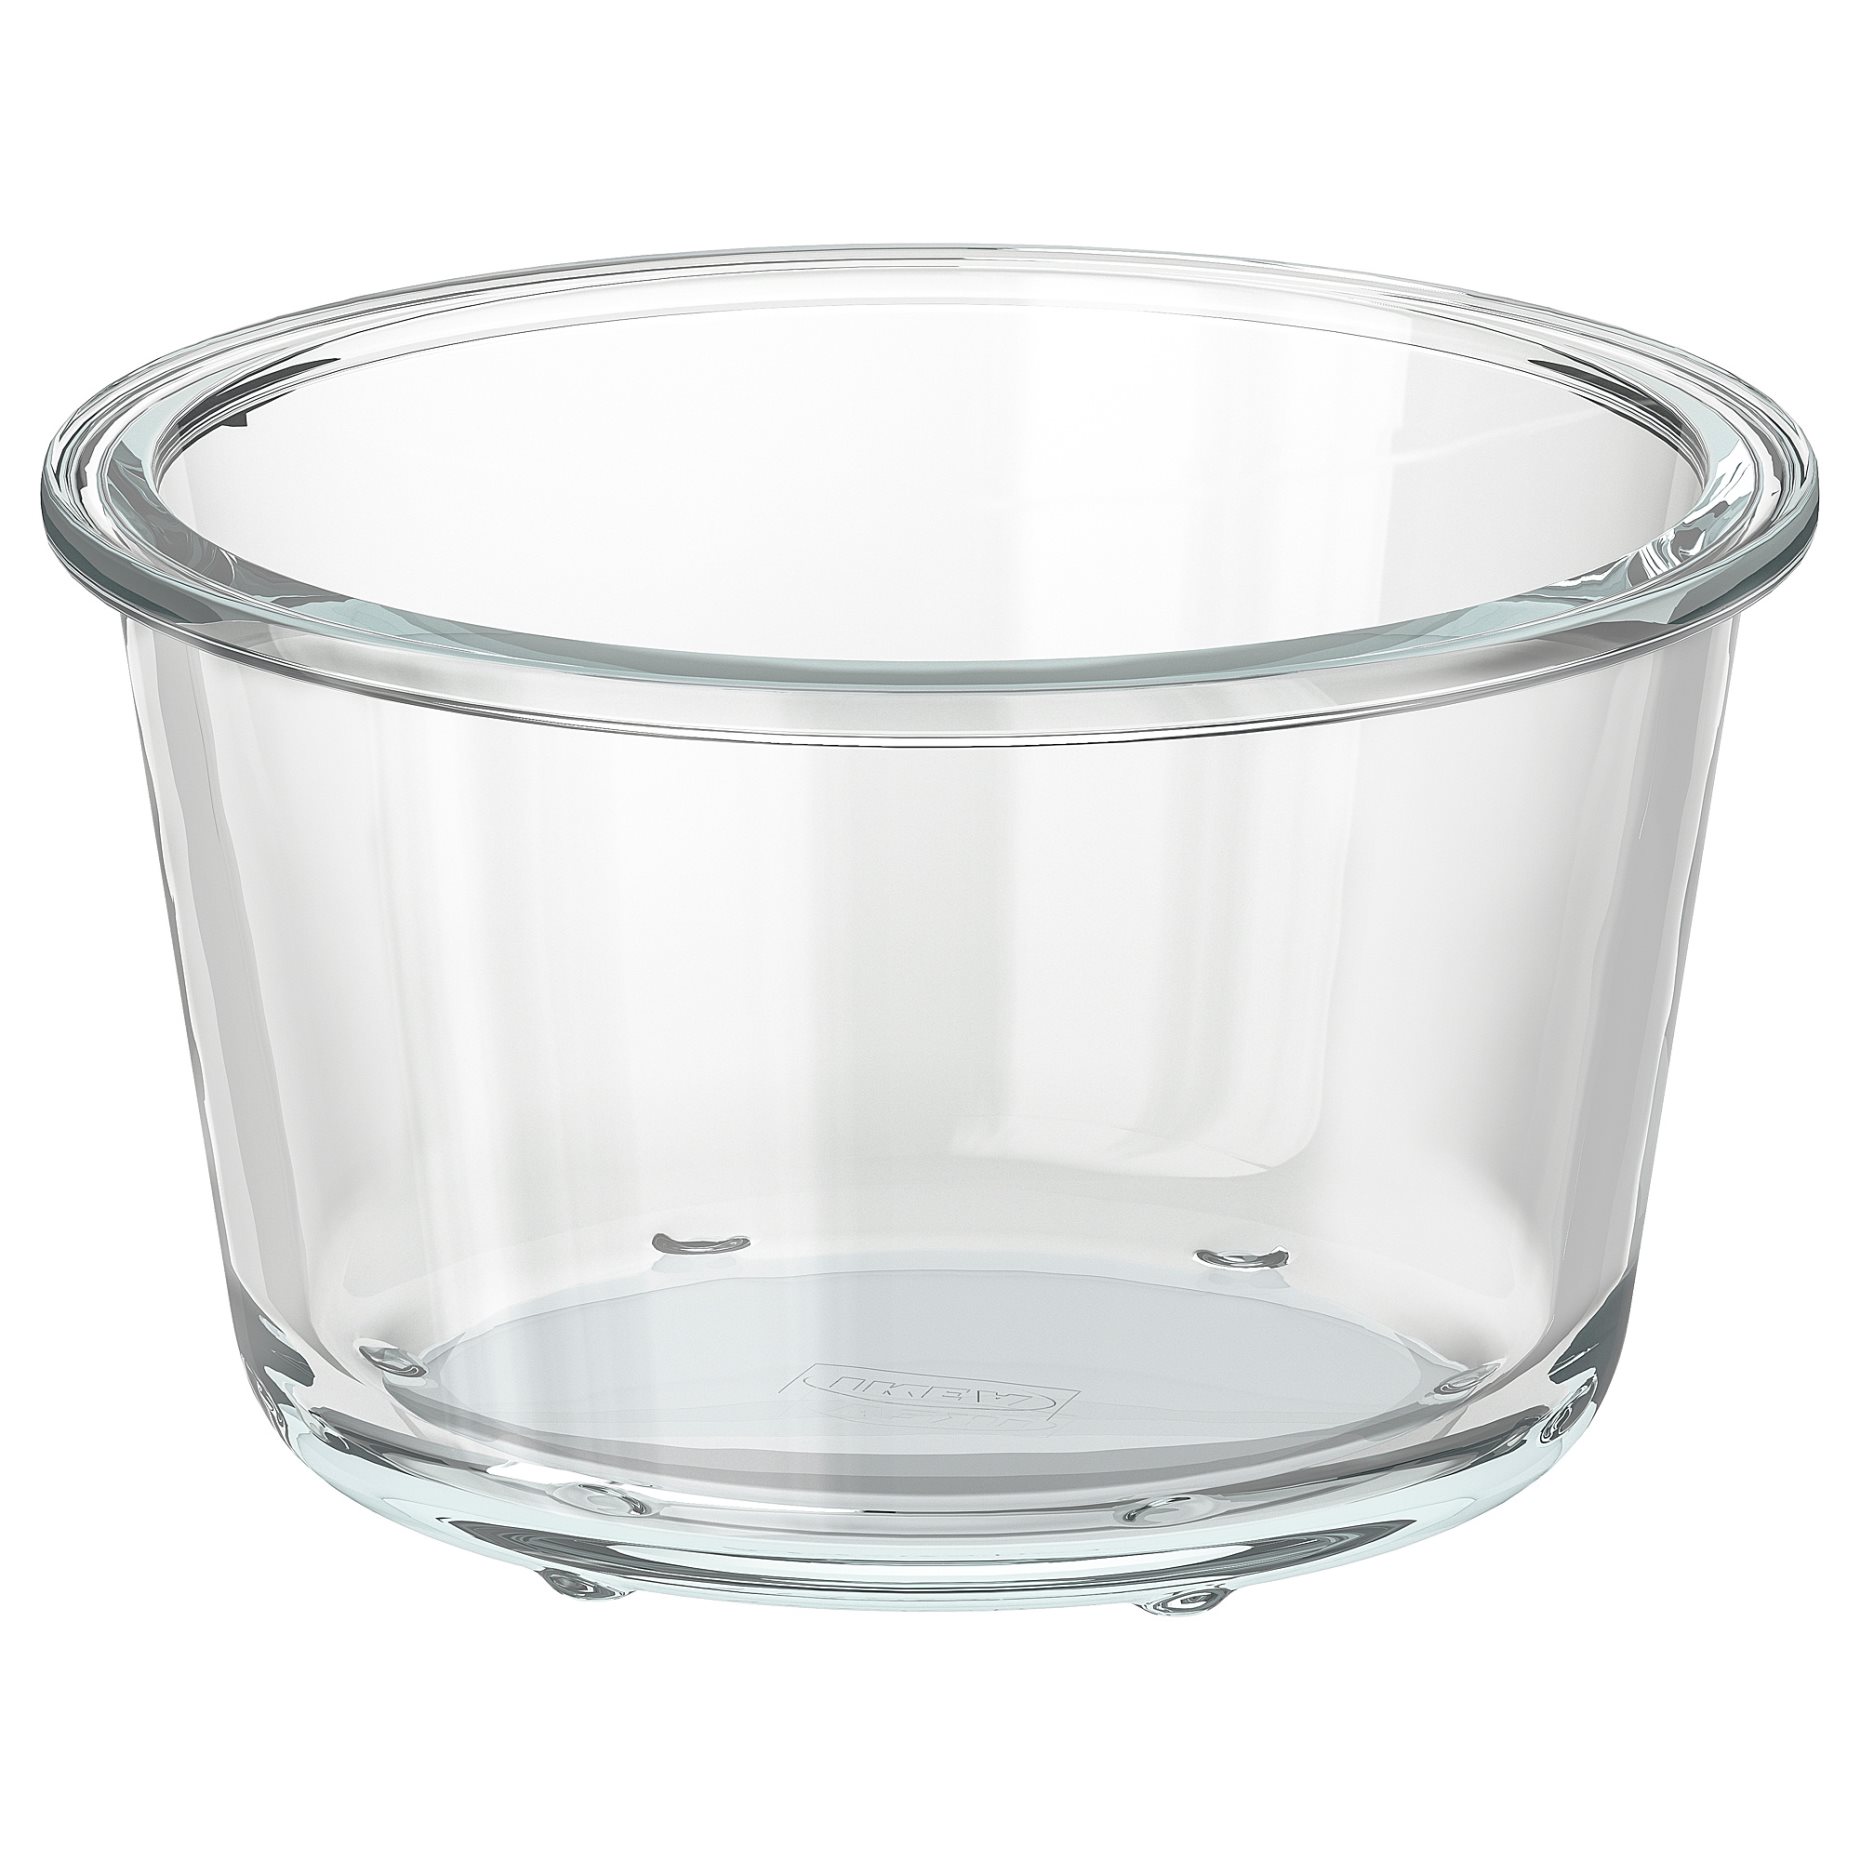 IKEA 365+, food container round/glass, 600 ml, 303.591.96